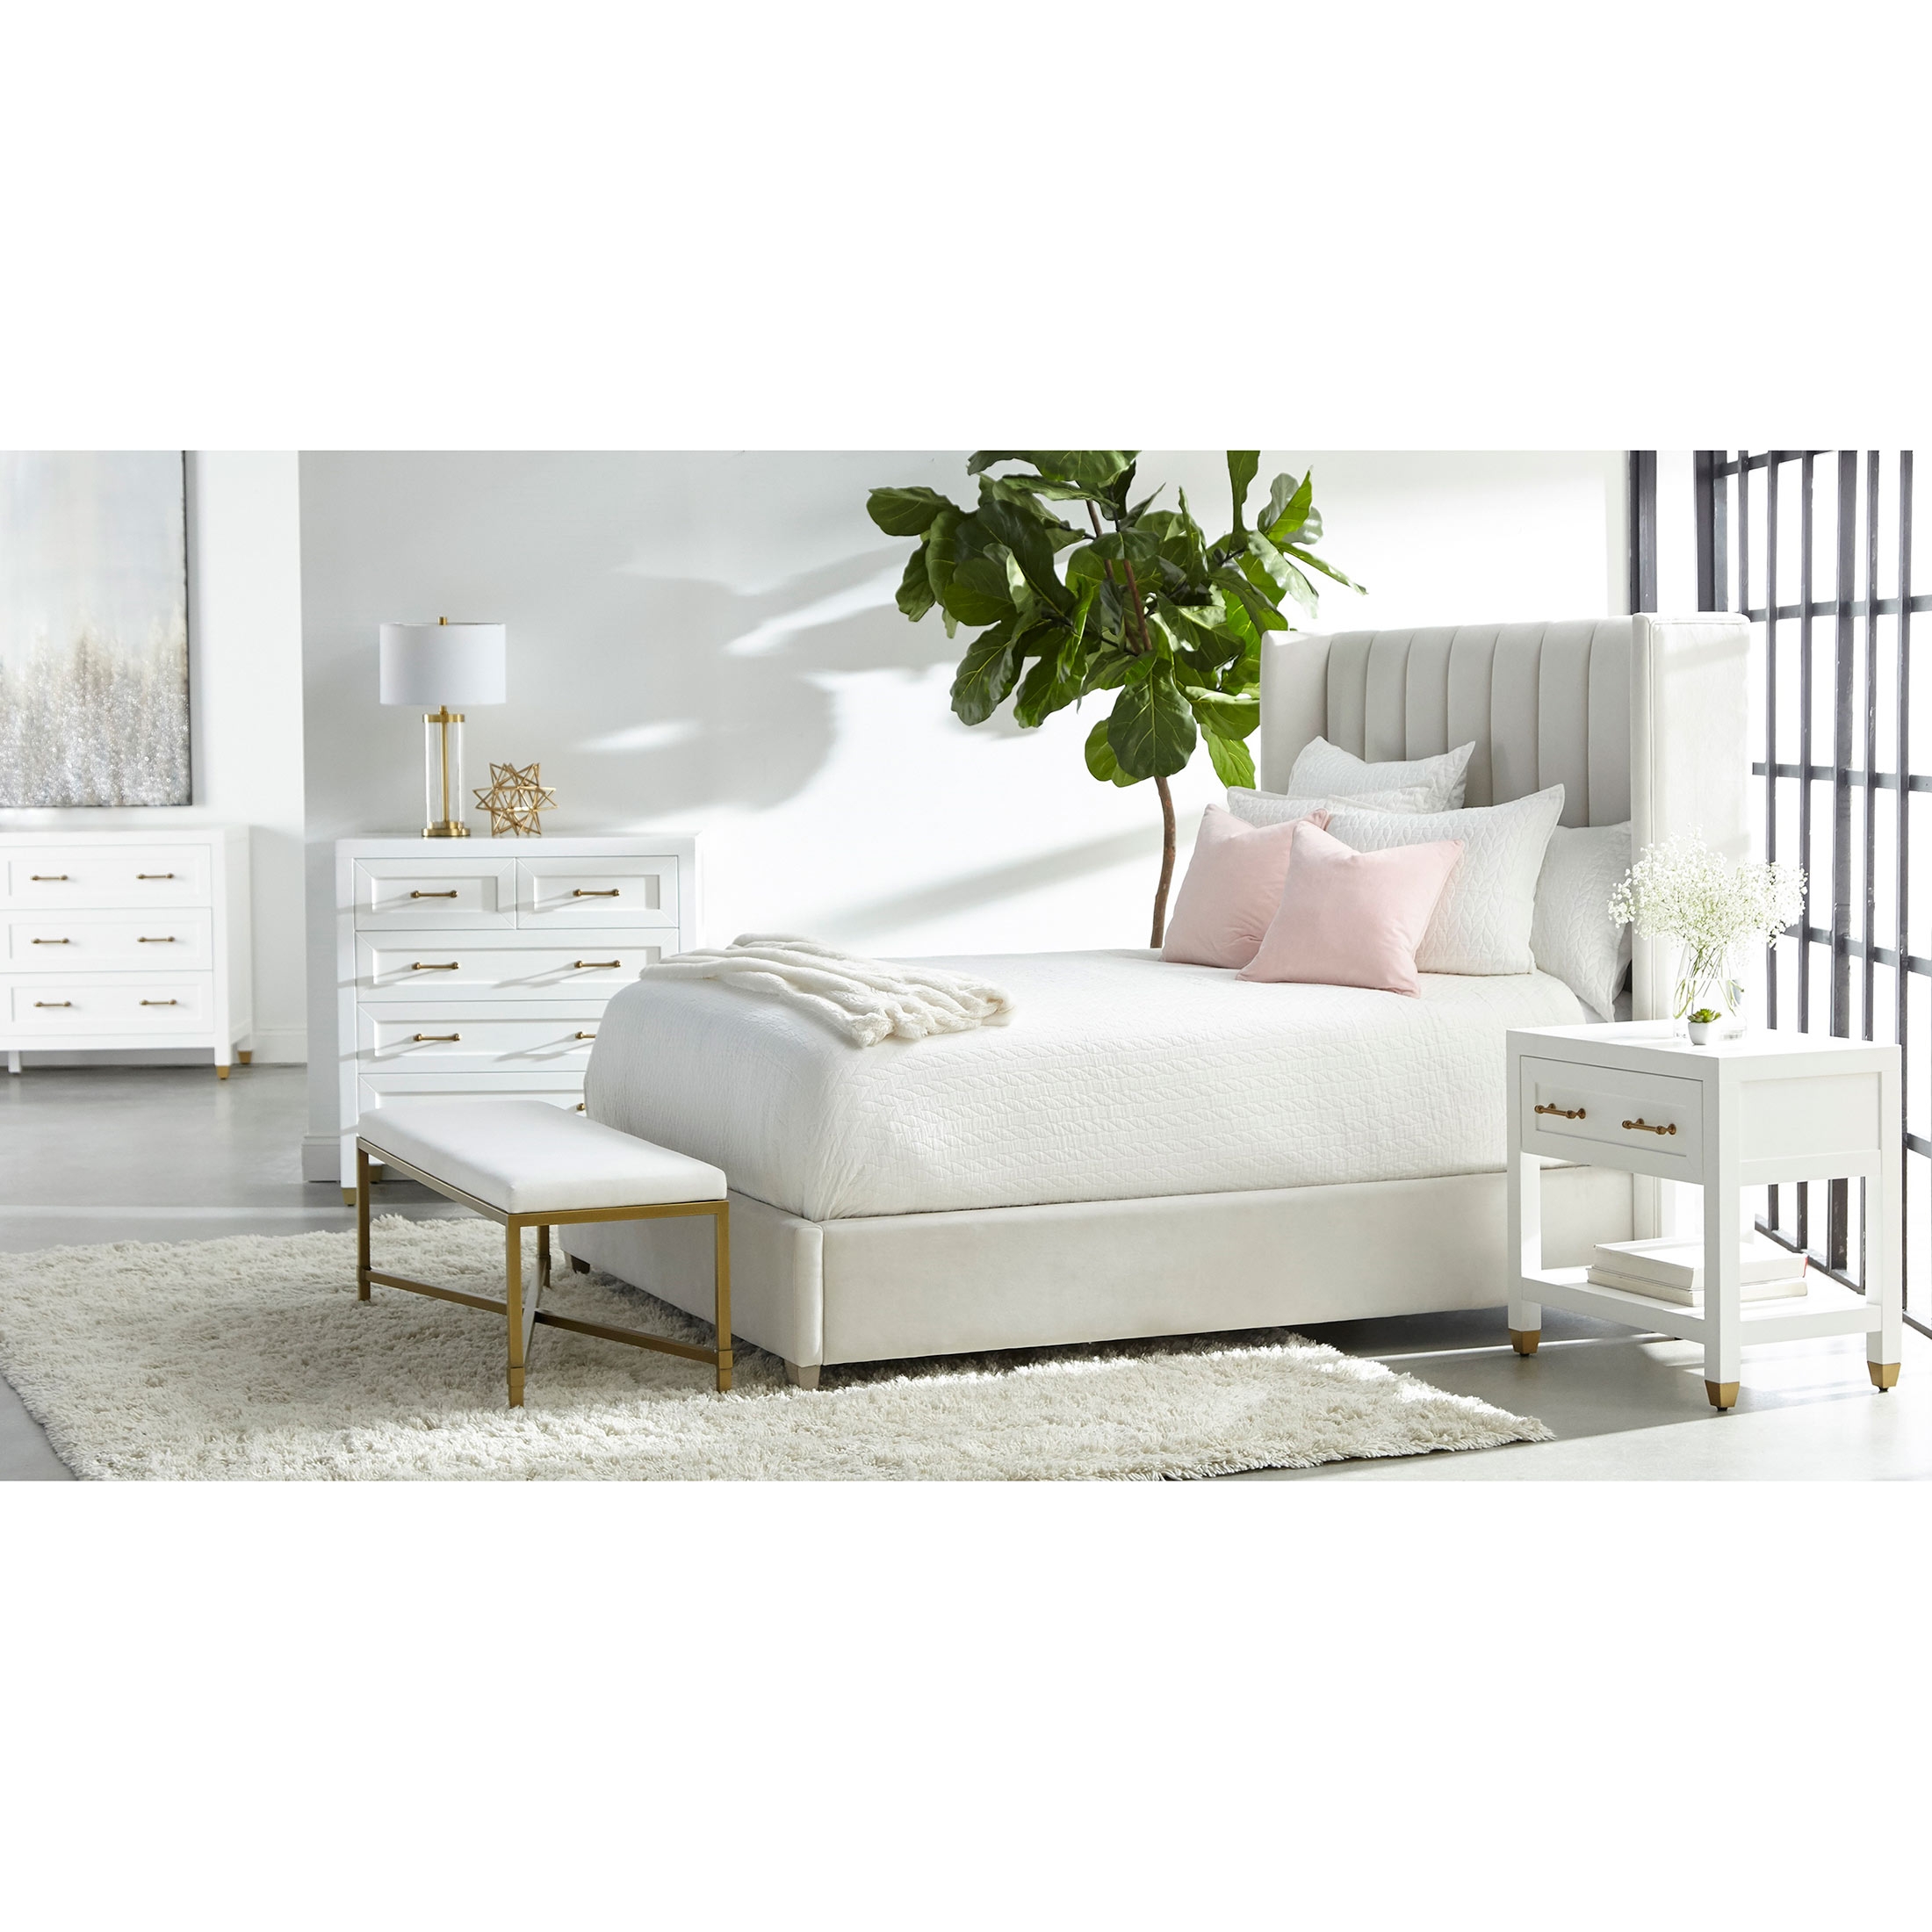 Stacy Modern Classic 5-Drawer Brass Accent White Dresser - Image 2